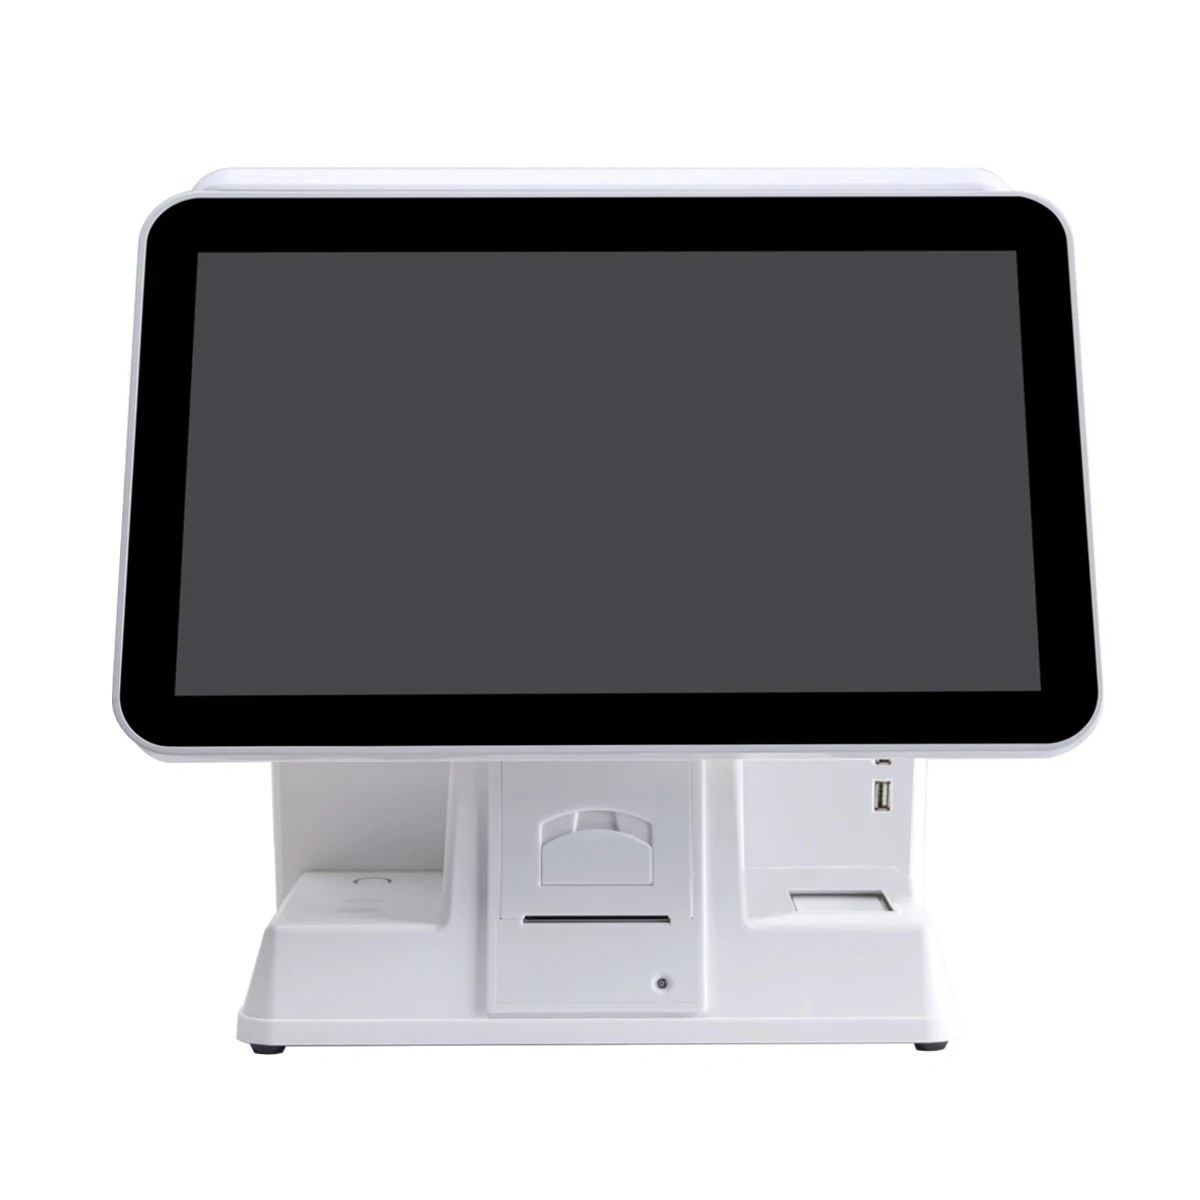 

Newest Touch Screen Supermarket POS System 15 Inch Resistive Touchscreen All In One POS Terminal for Retails